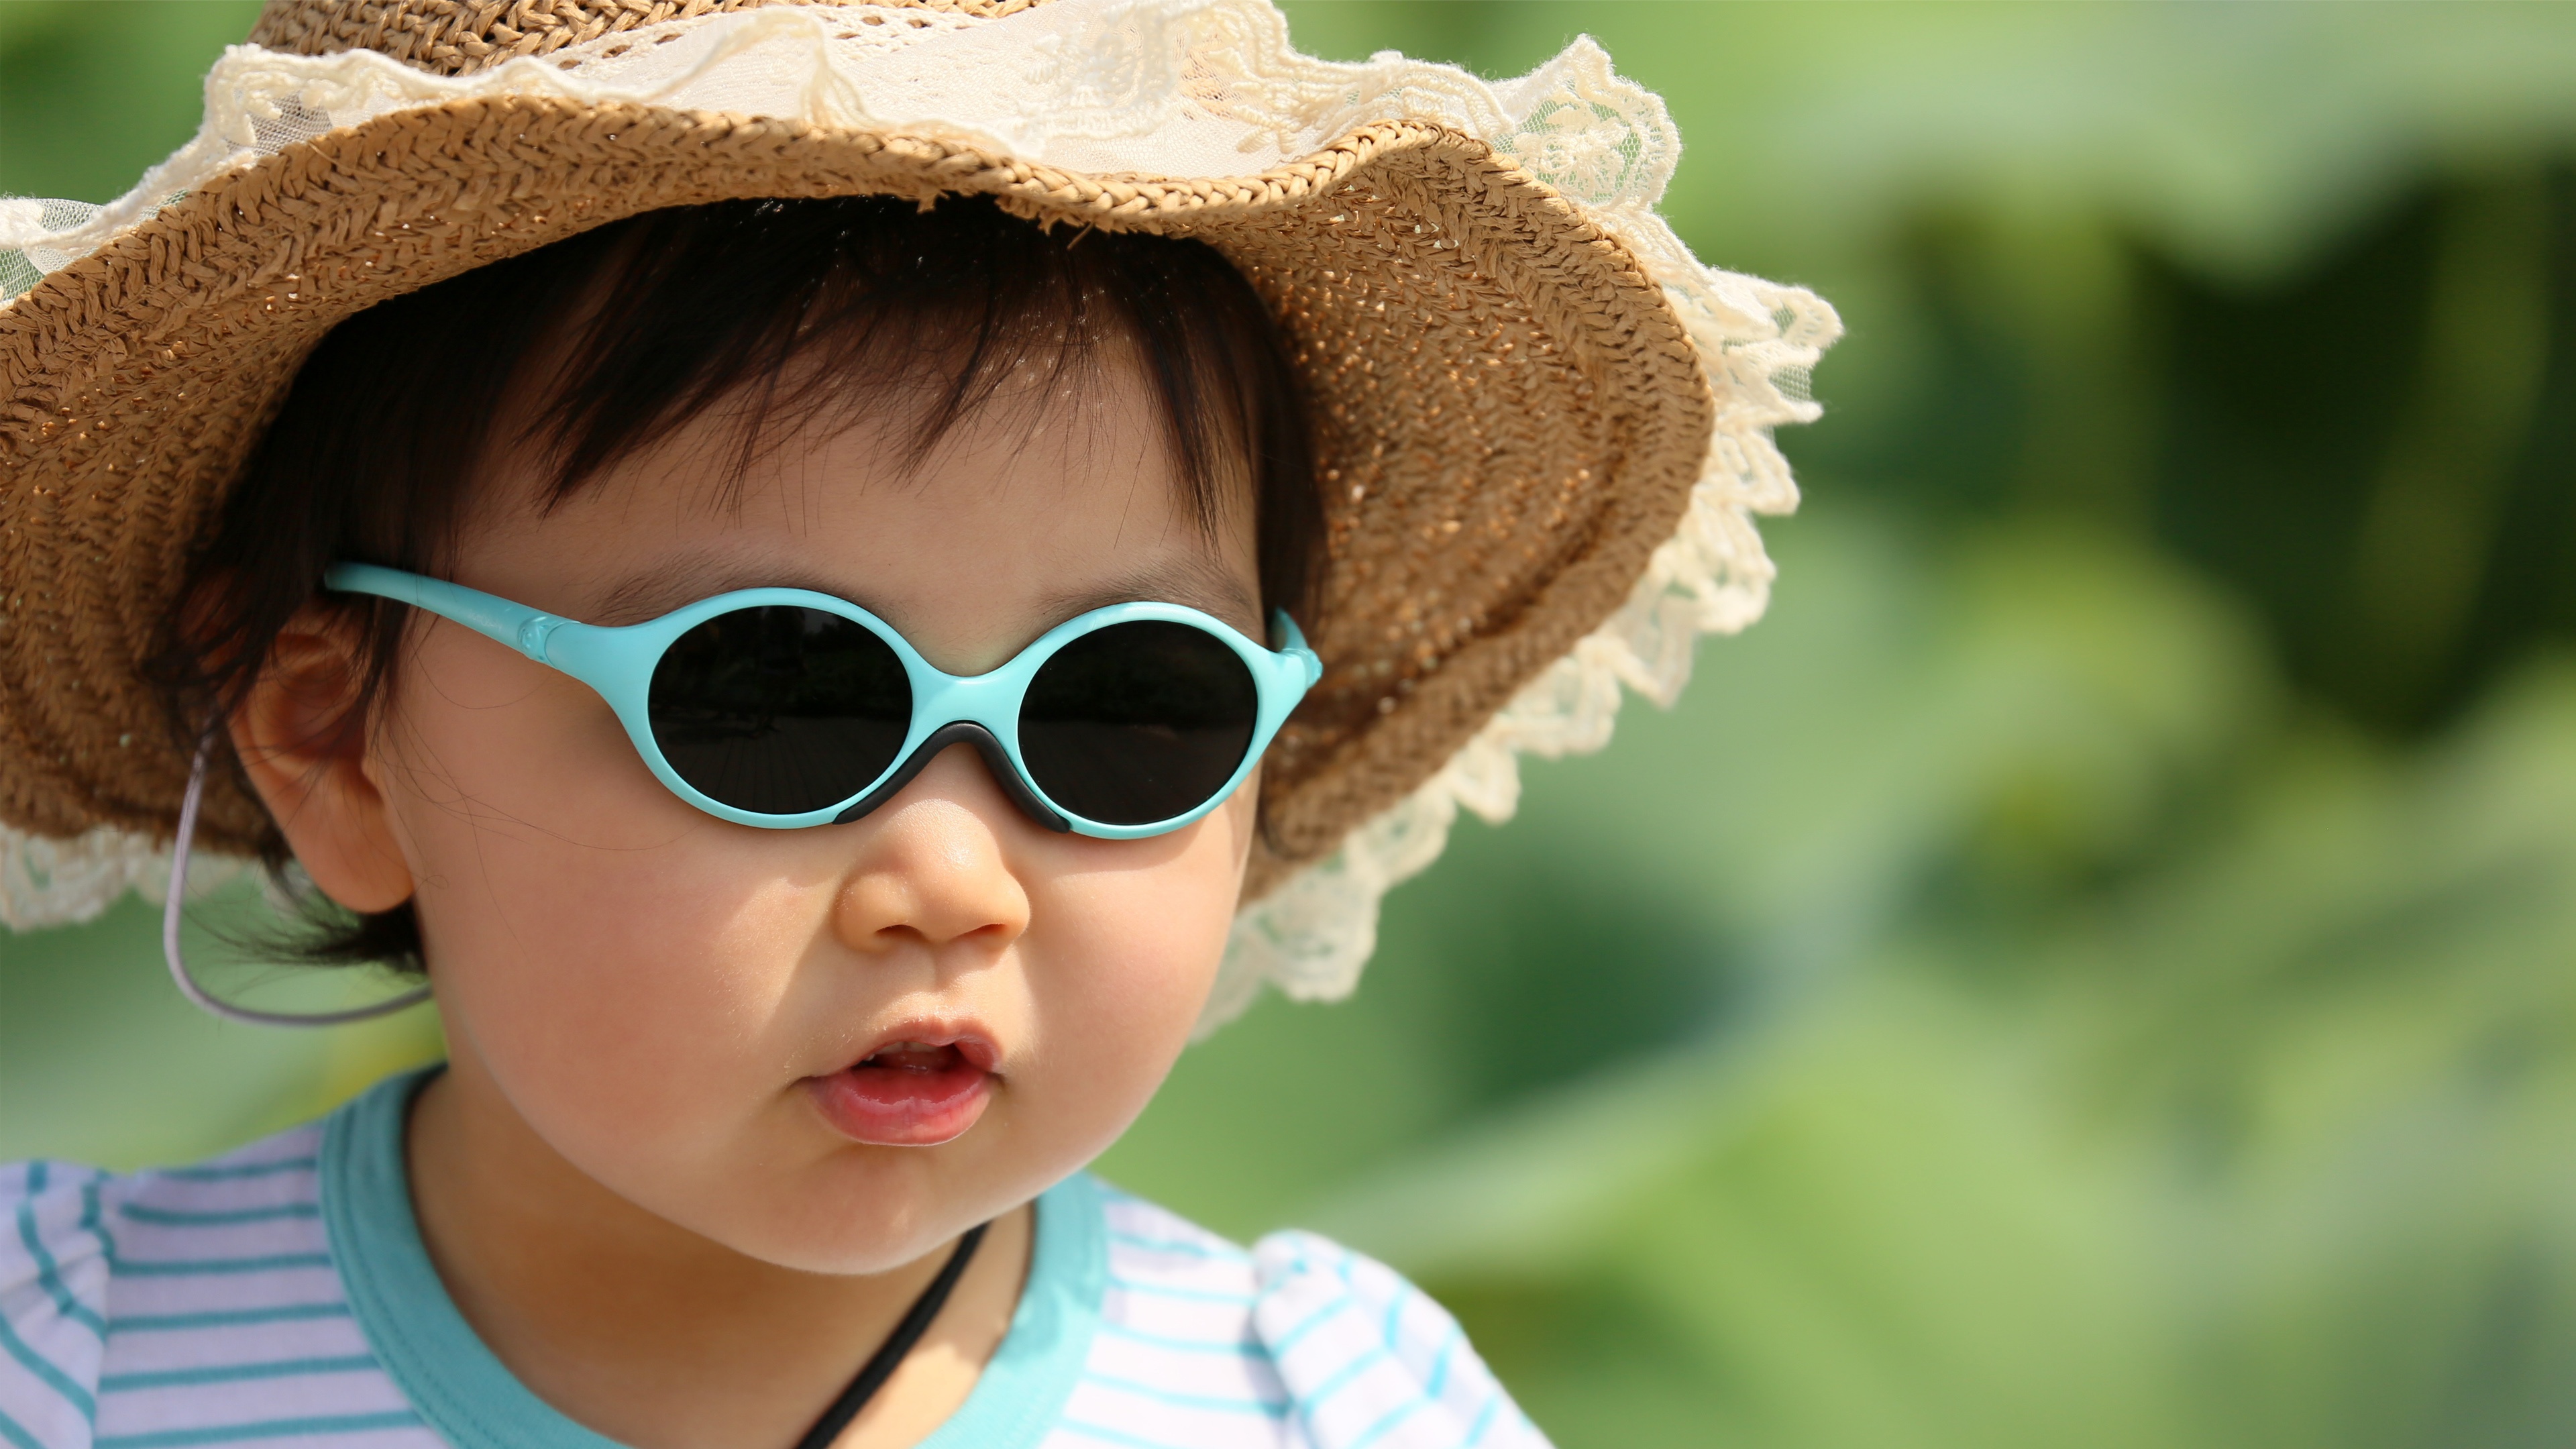 baby photos wallpapers,eyewear,sunglasses,cool,child,face